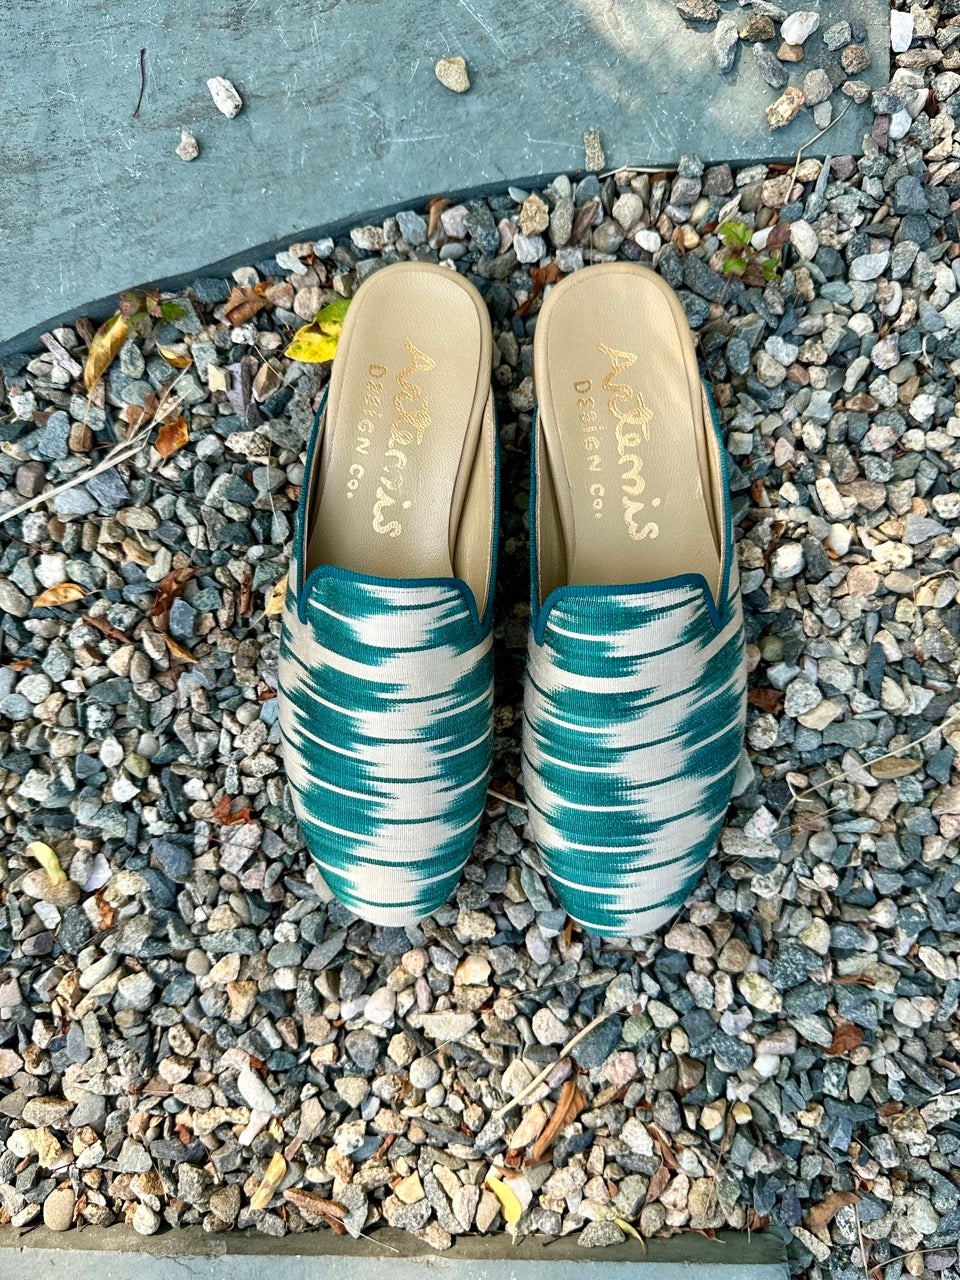 The Summer Silk Ikats slippers in a stunning color combination of teal and white are a fashionable and comfortable choice for the summer season. Made from lightweight silk ikat fabric, these slippers showcase a blend of colors that evoke a sense of freshness and serenity. The vibrant teal hue adds a pop of color, while the crisp white complements and balances the overall design. (Front View)